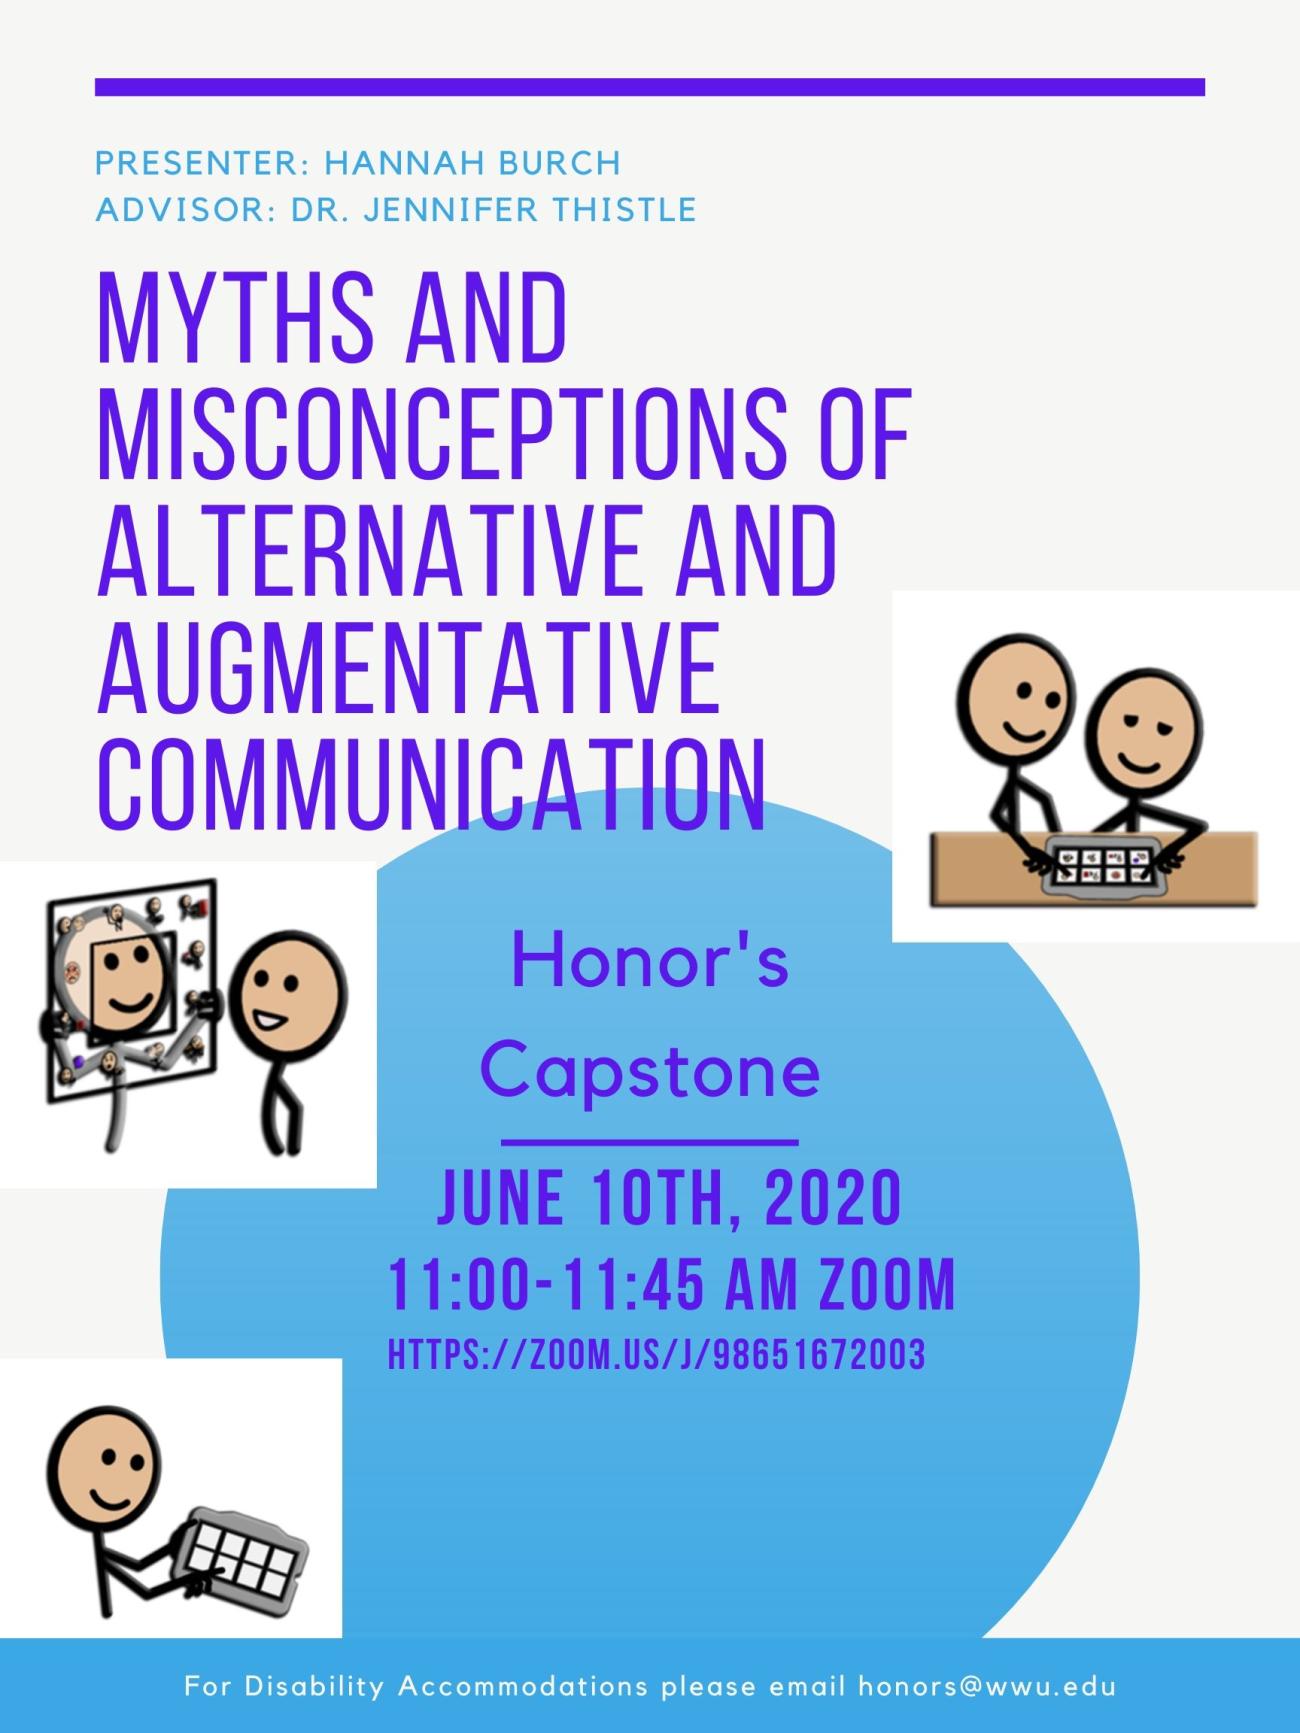 Image: 3 different cartoon images each depict a pair of people, the first using an eye-gaze board, and the others using high-tech alternative and augmentative communication devices. Text: "Presenter: Hannah Burch, Advisor: Dr. Jennifer Thistle, Myths and Misconceptions of Alternative and Augmentative Communication. Honor's Capstone, June 10th 2020, 11:00-11:45 am Zoom, Https://zoom.us/J/98651672003. For disability accommodations please email honors@wwu.edu."